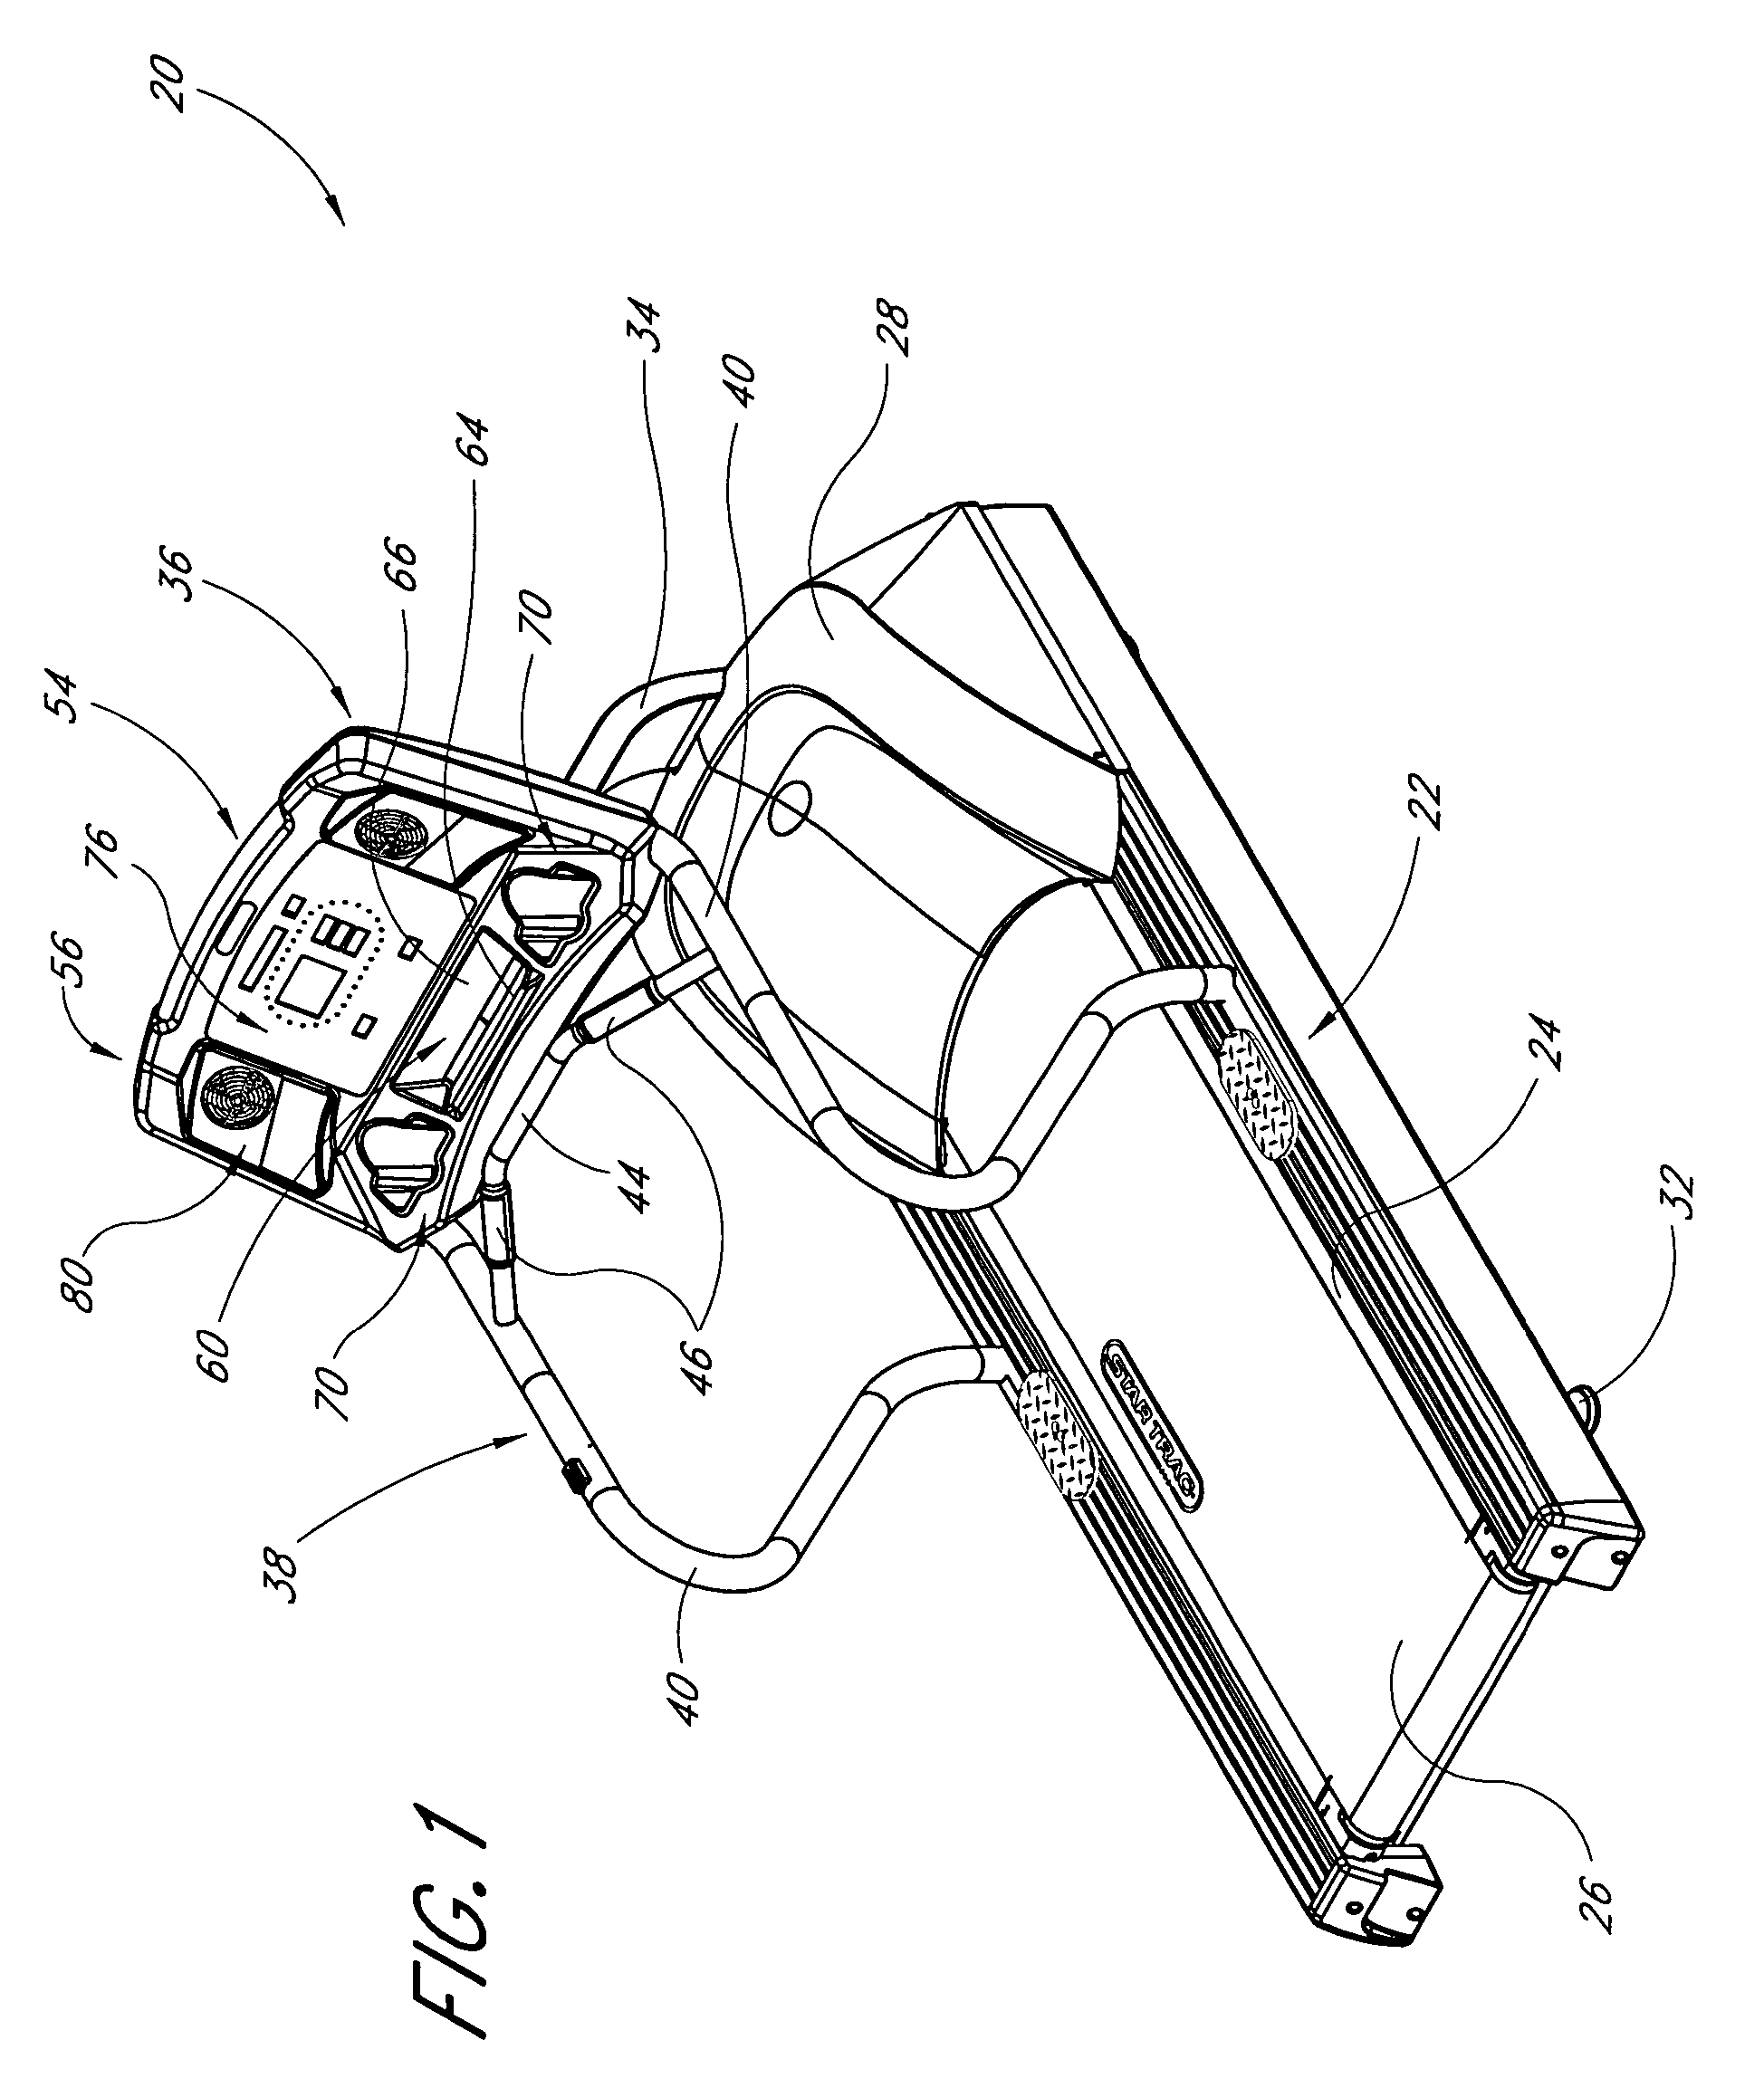 Exercise equipment with universal PDA cradle